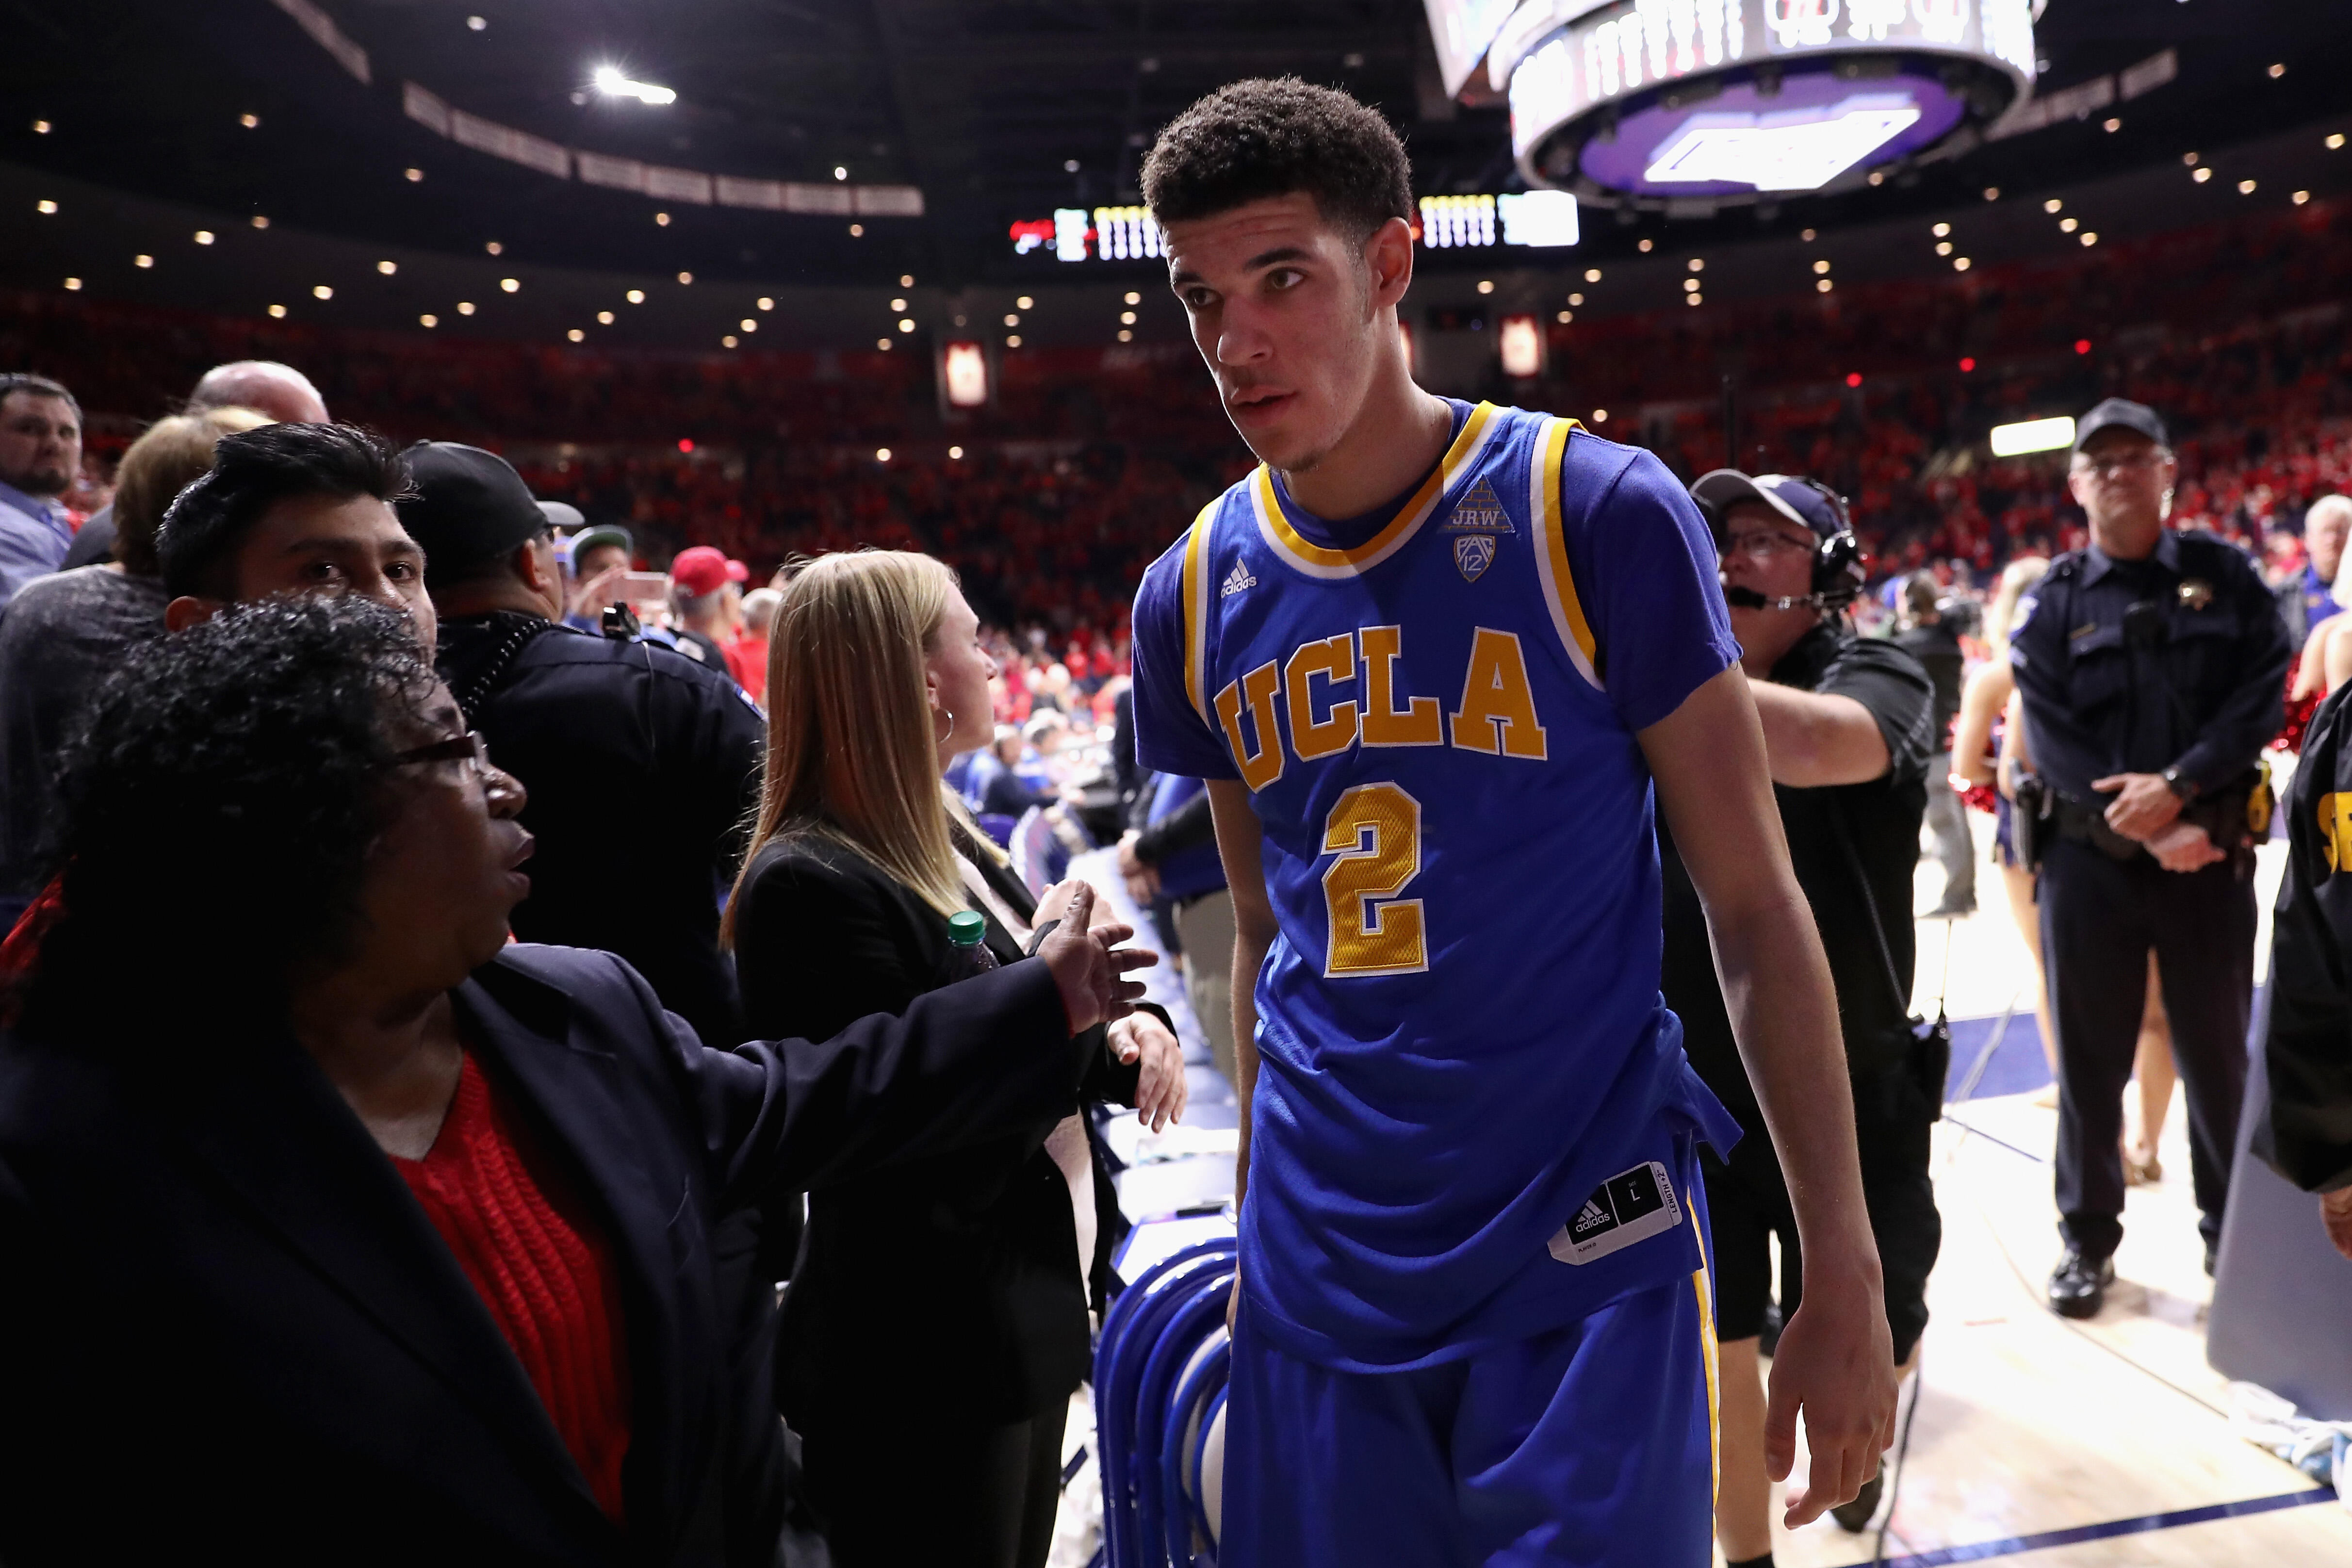 TUCSON, AZ - FEBRUARY 25:  Lonzo Ball #2 of the UCLA Bruins walks off the court after defeating the Arizona Wildcats in the college basketball game at McKale Center on February 25, 2017 in Tucson, Arizona. The Bruins defeated the Wildcats 77-72.  (Photo b